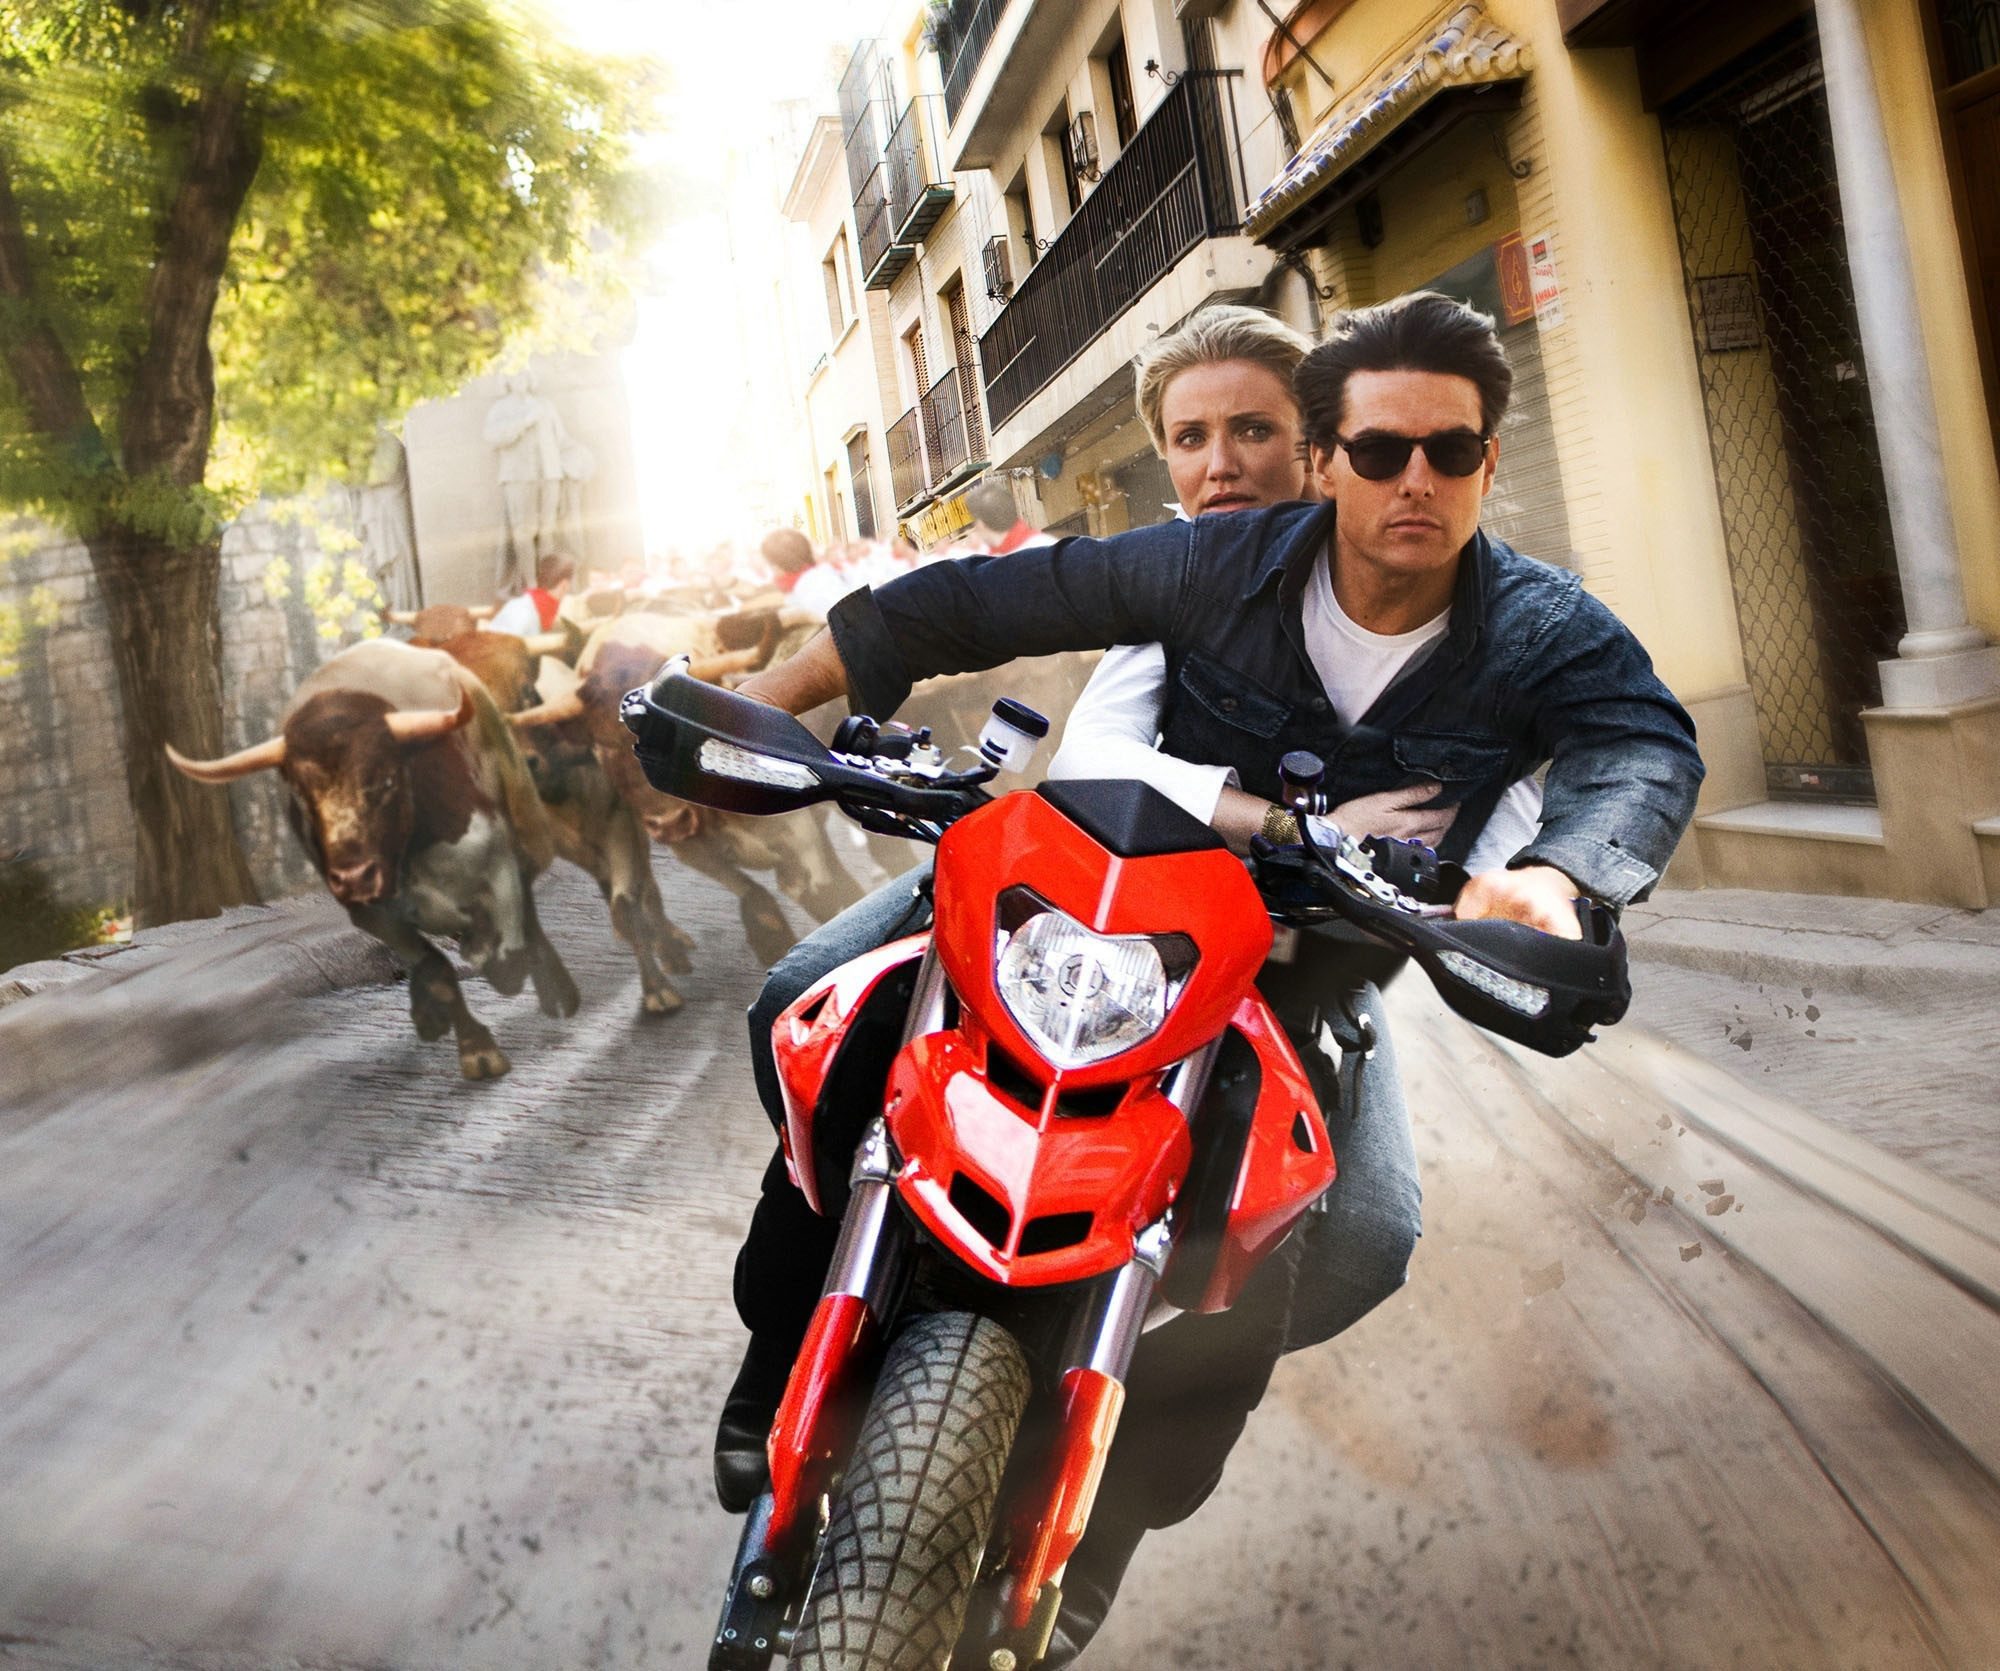 Knight and Day, Krasch, Tom Cruise